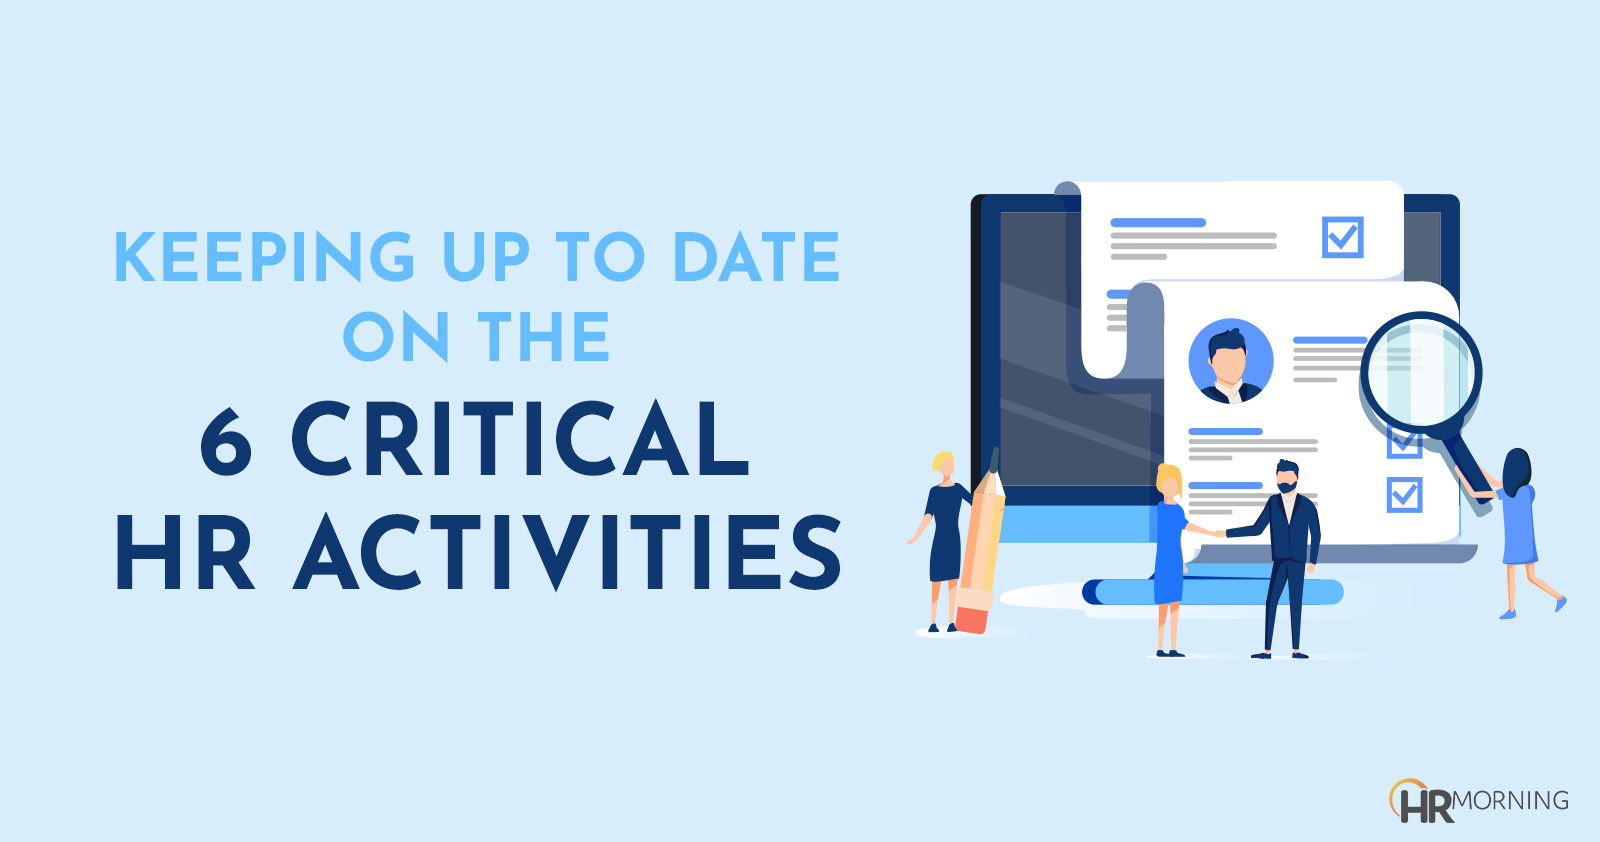 Keeping Up to Date on the 6 Critical HR Activities